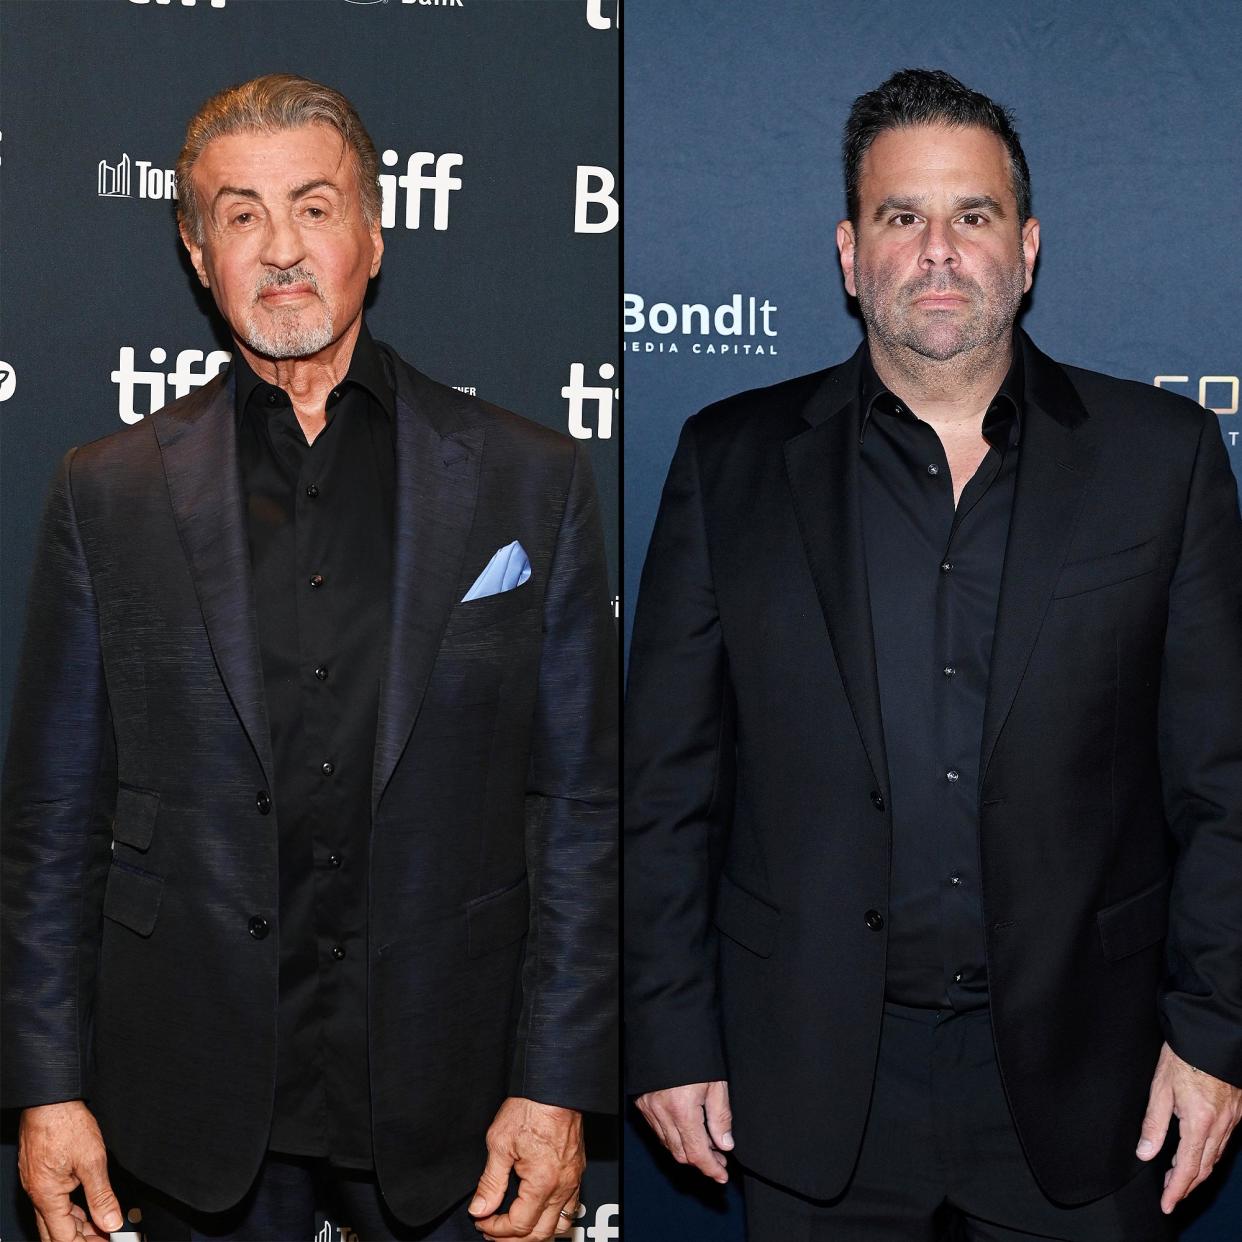 Sylvester Stallone Allegedly Paid Over 3 Million for 1 Days Work on Randall Emmetts New Movie